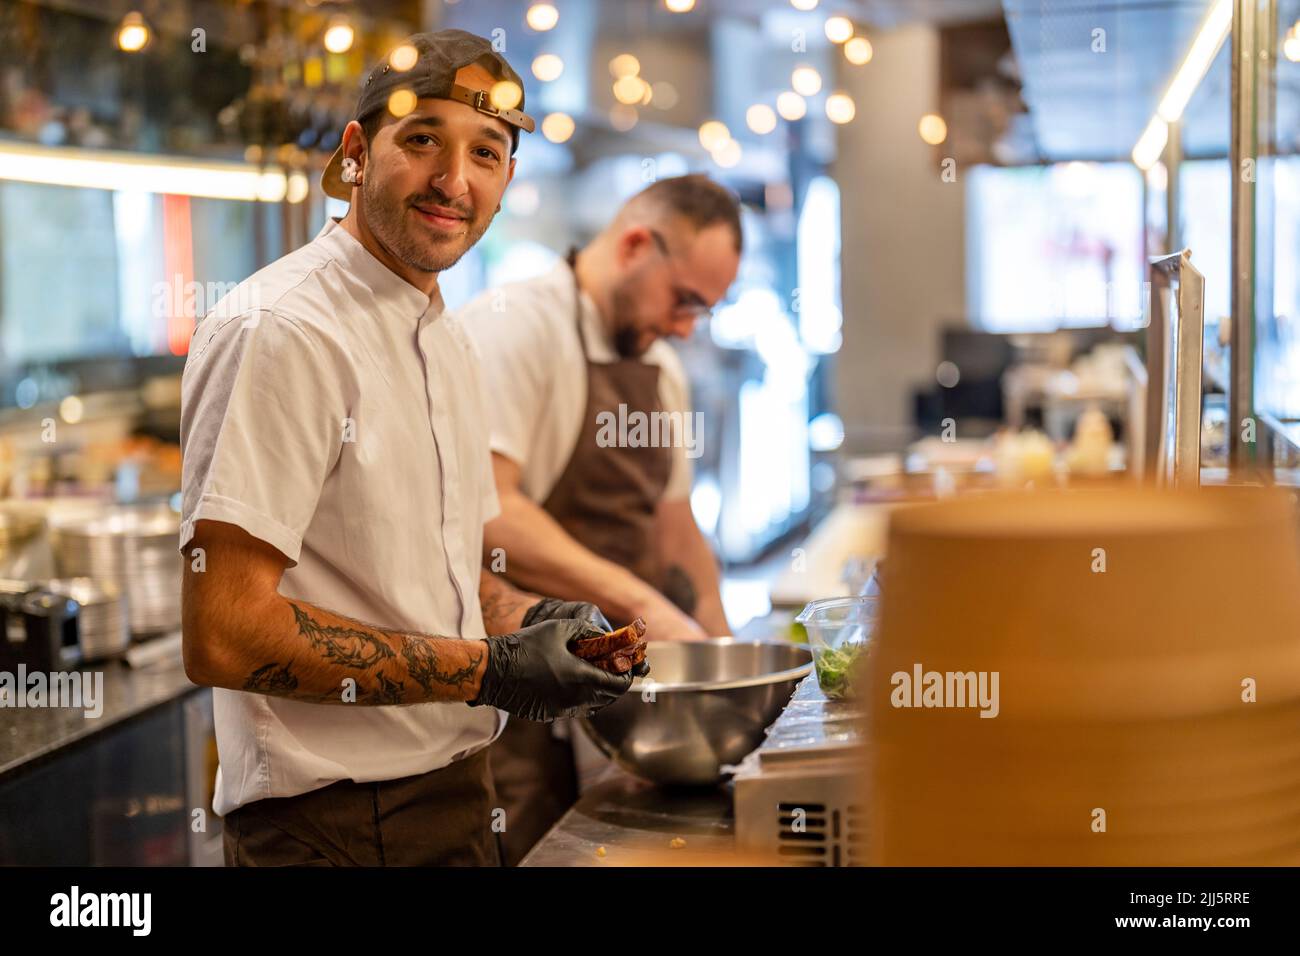 Smiling chef preparing with food in kitchen of restaurant Stock Photo